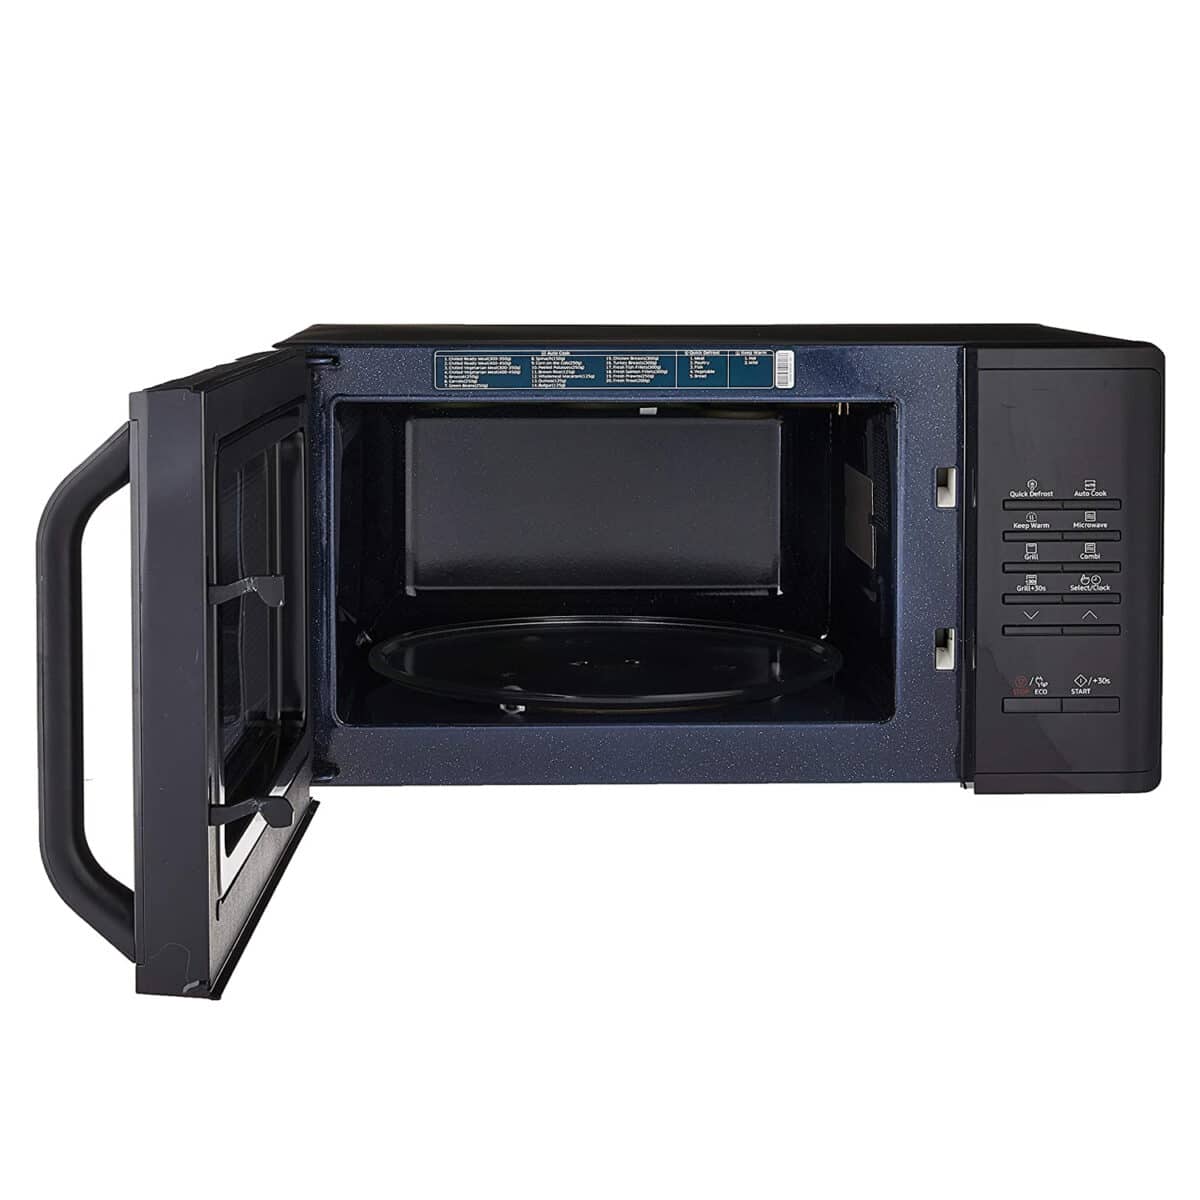 Samsung 23L Microwave Oven with Grill MG23K3515AK